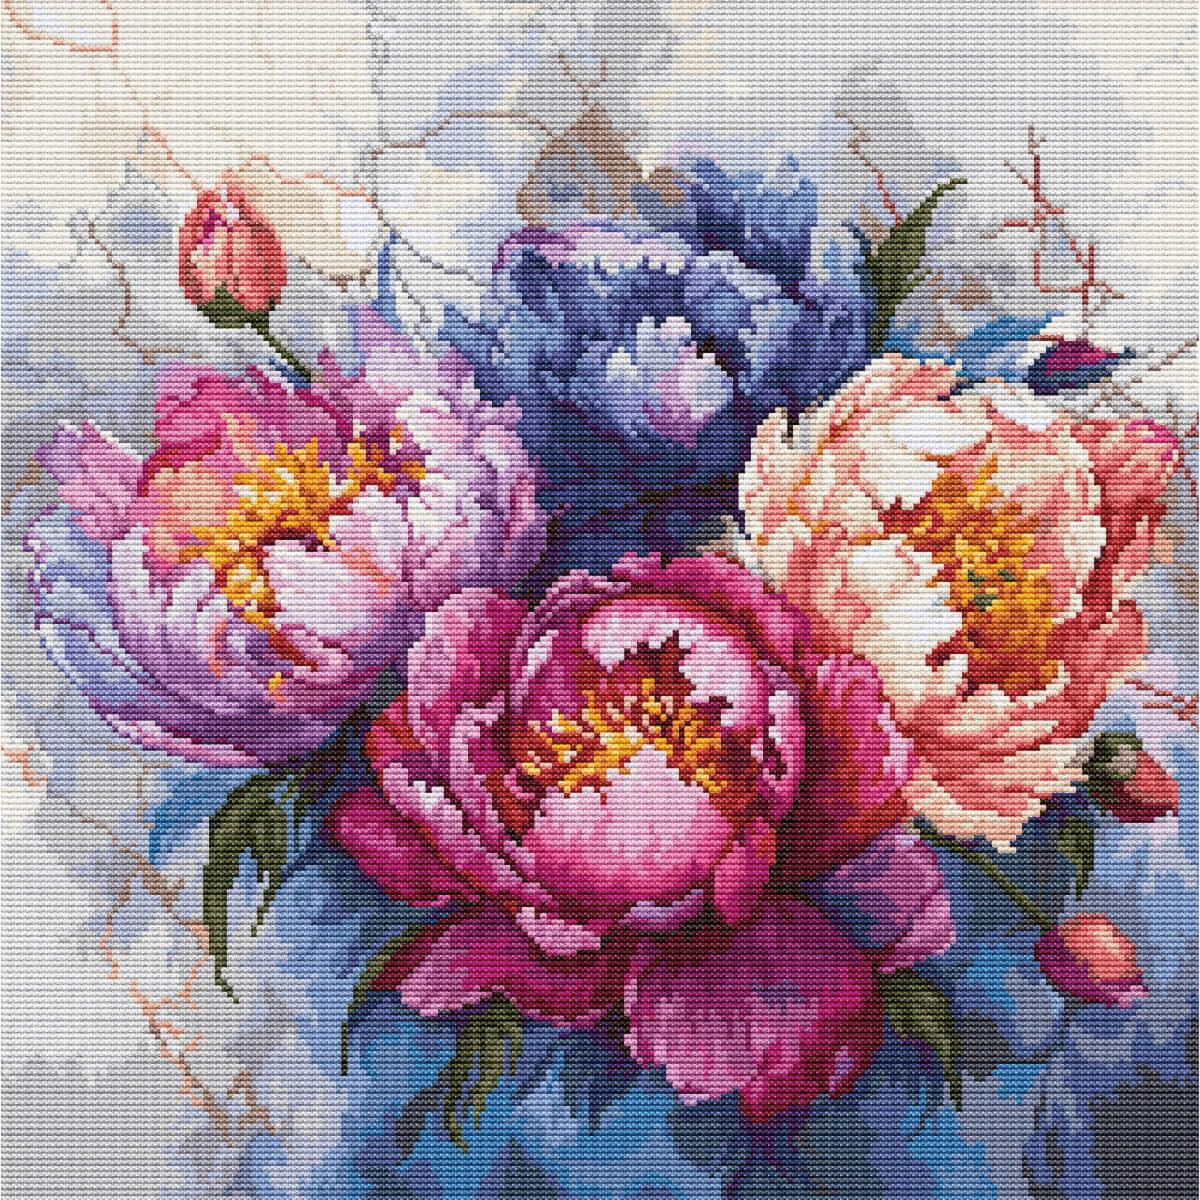 A colorful Luca-s embroidery pack with four fully bloomed...